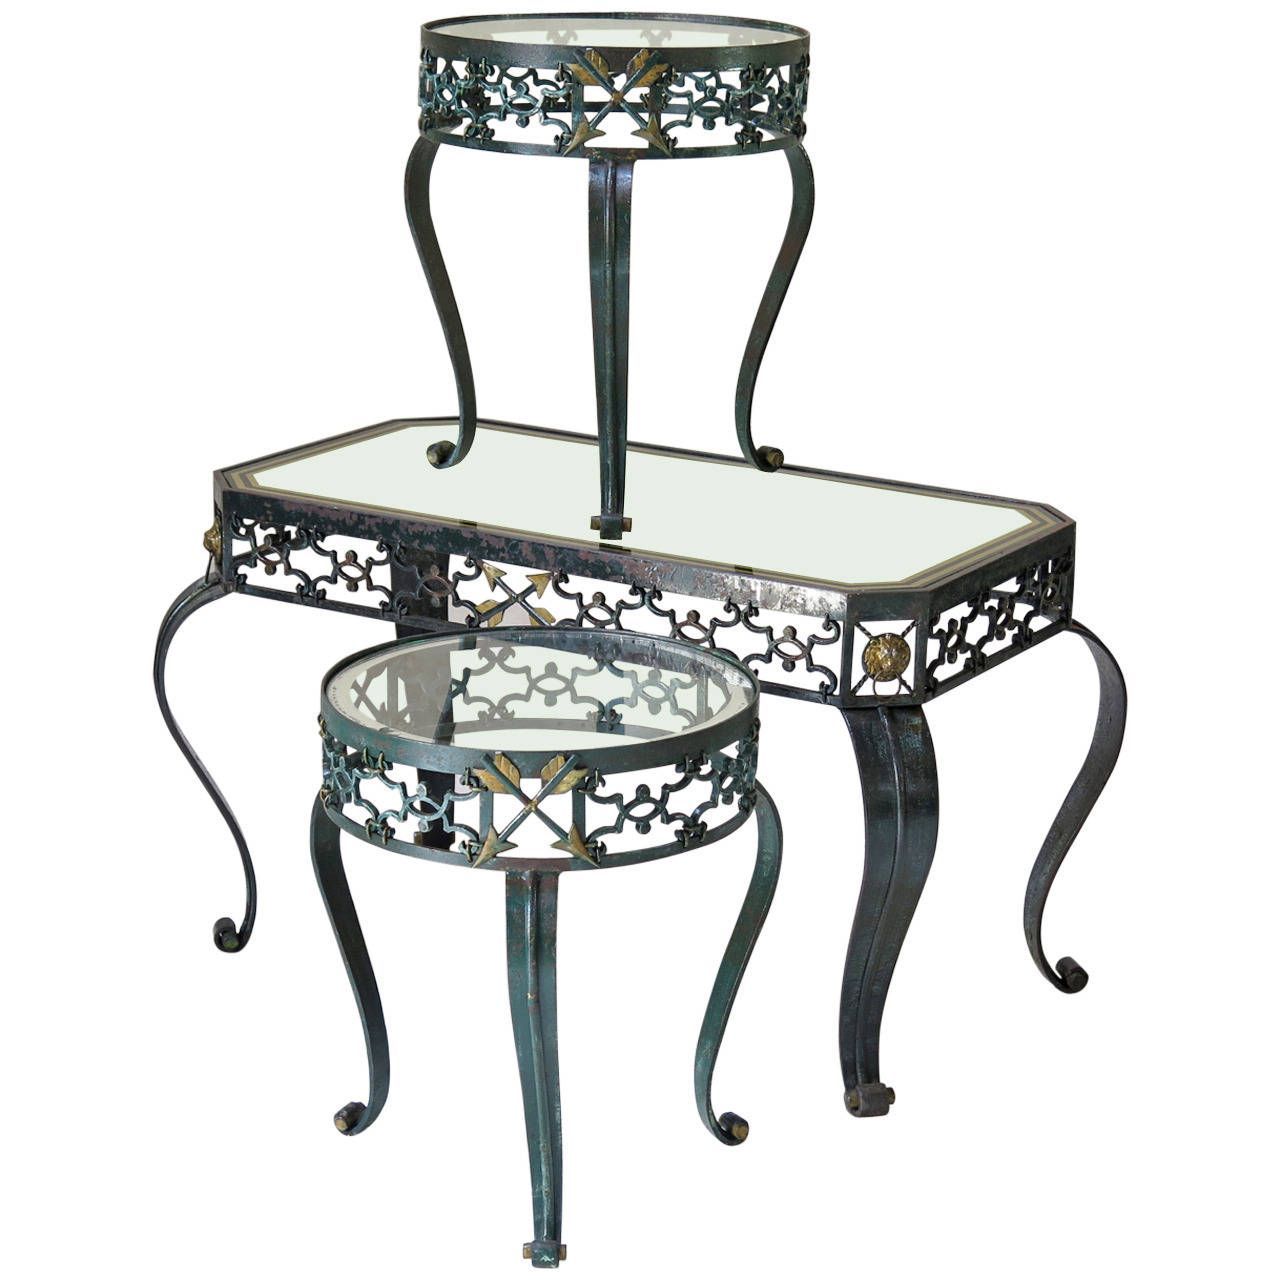 Trio Of Art Deco Wrought Iron Coffee Tables, France, 1940s Intended For Wrought Iron Cocktail Tables (View 4 of 15)